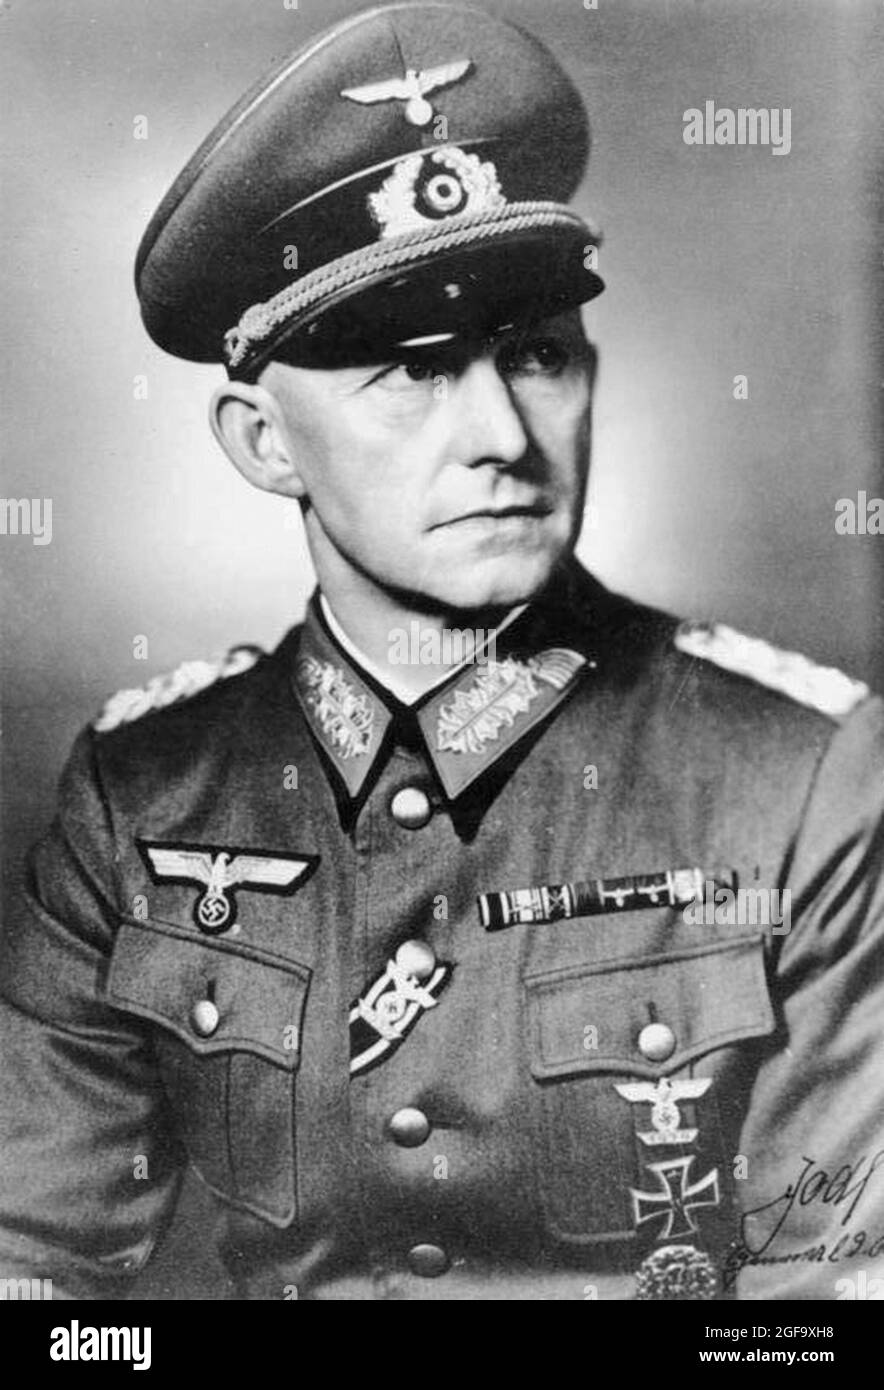 A portrait of German army Chief of Operations Staff Alfred Jodl. He was captured in 1945, tried and hanged at Nuremberg in 1946. Credit: German Bundesarchiv Stock Photo